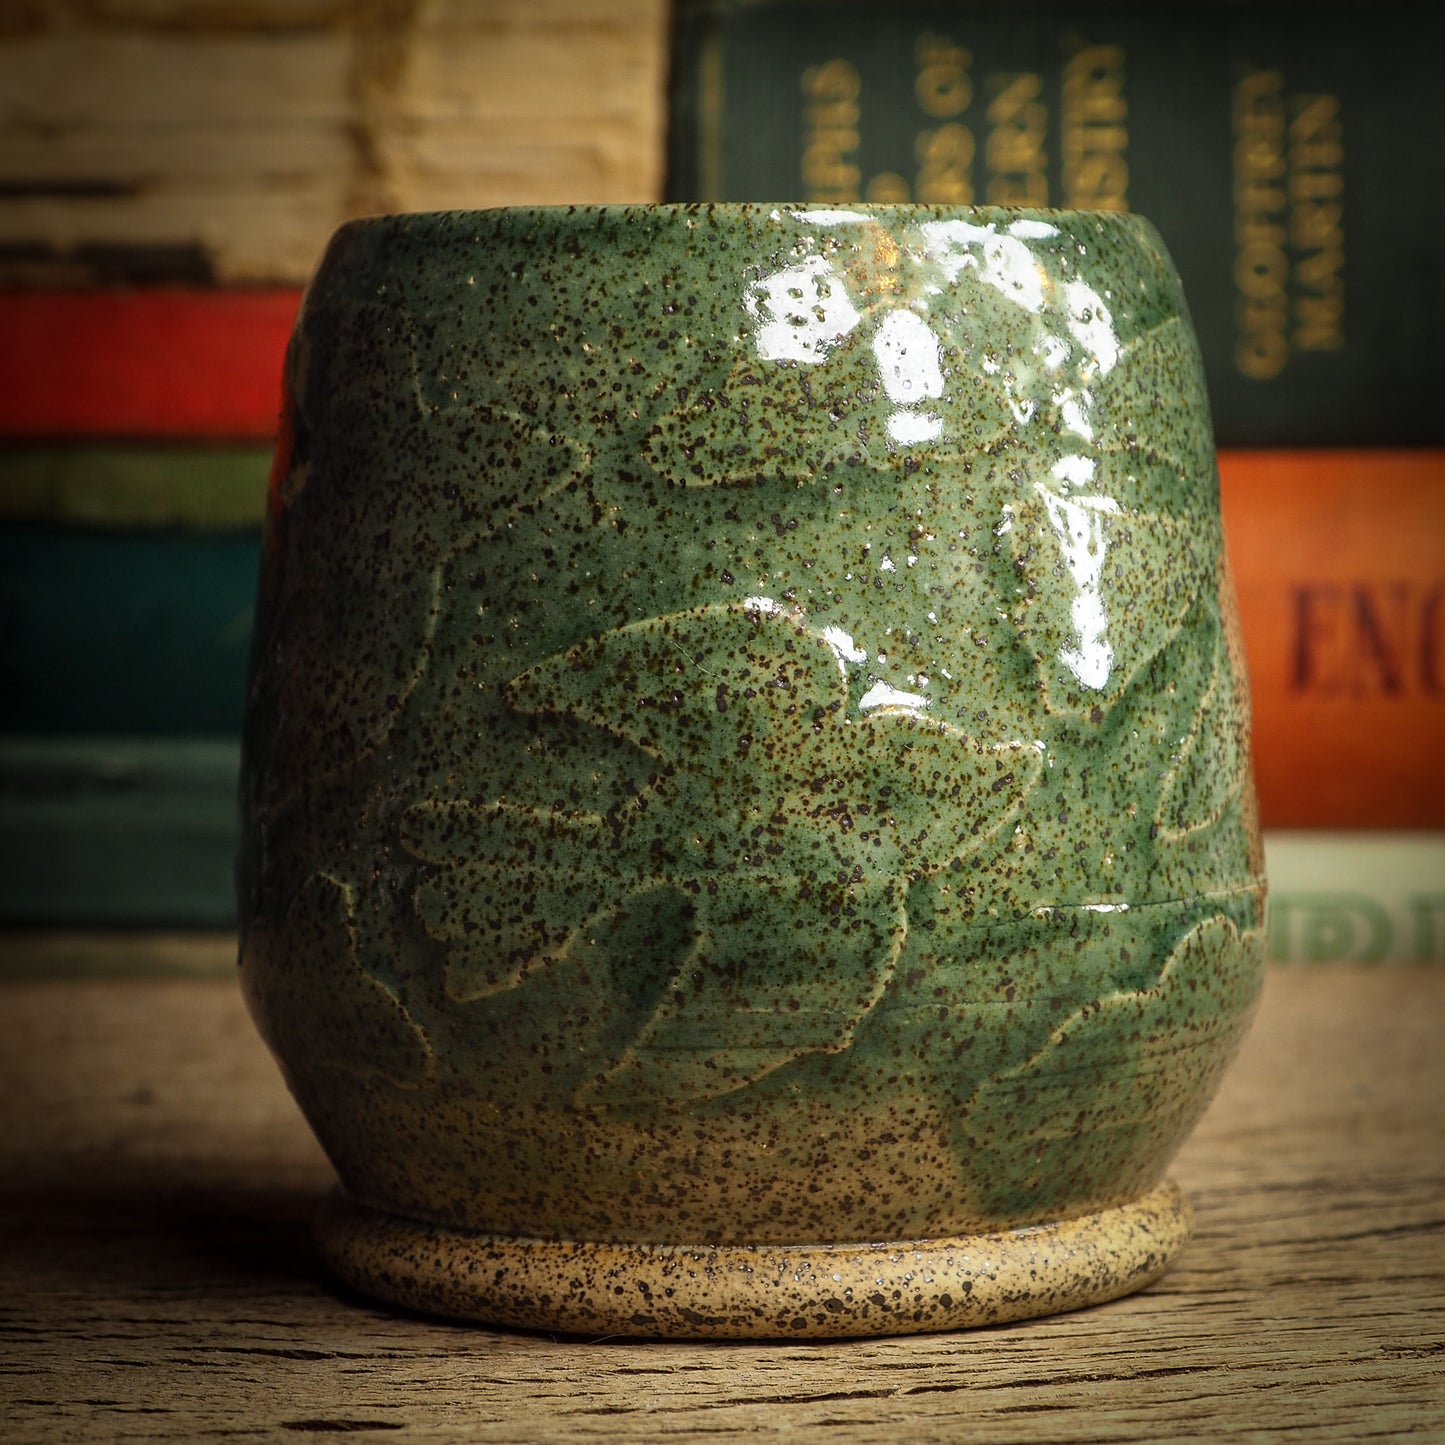 An original glazed ceramic jar by Idania Salcido, the artist behind Danita Art. It measures 2.5 x 2.5 x 3.5 Inches, with deep green hue glazes and hand decorated figures on the sides. Totally handmade in my studio, this is a unique piece that cannot be repeated. Food and drink safe, hand wash only.